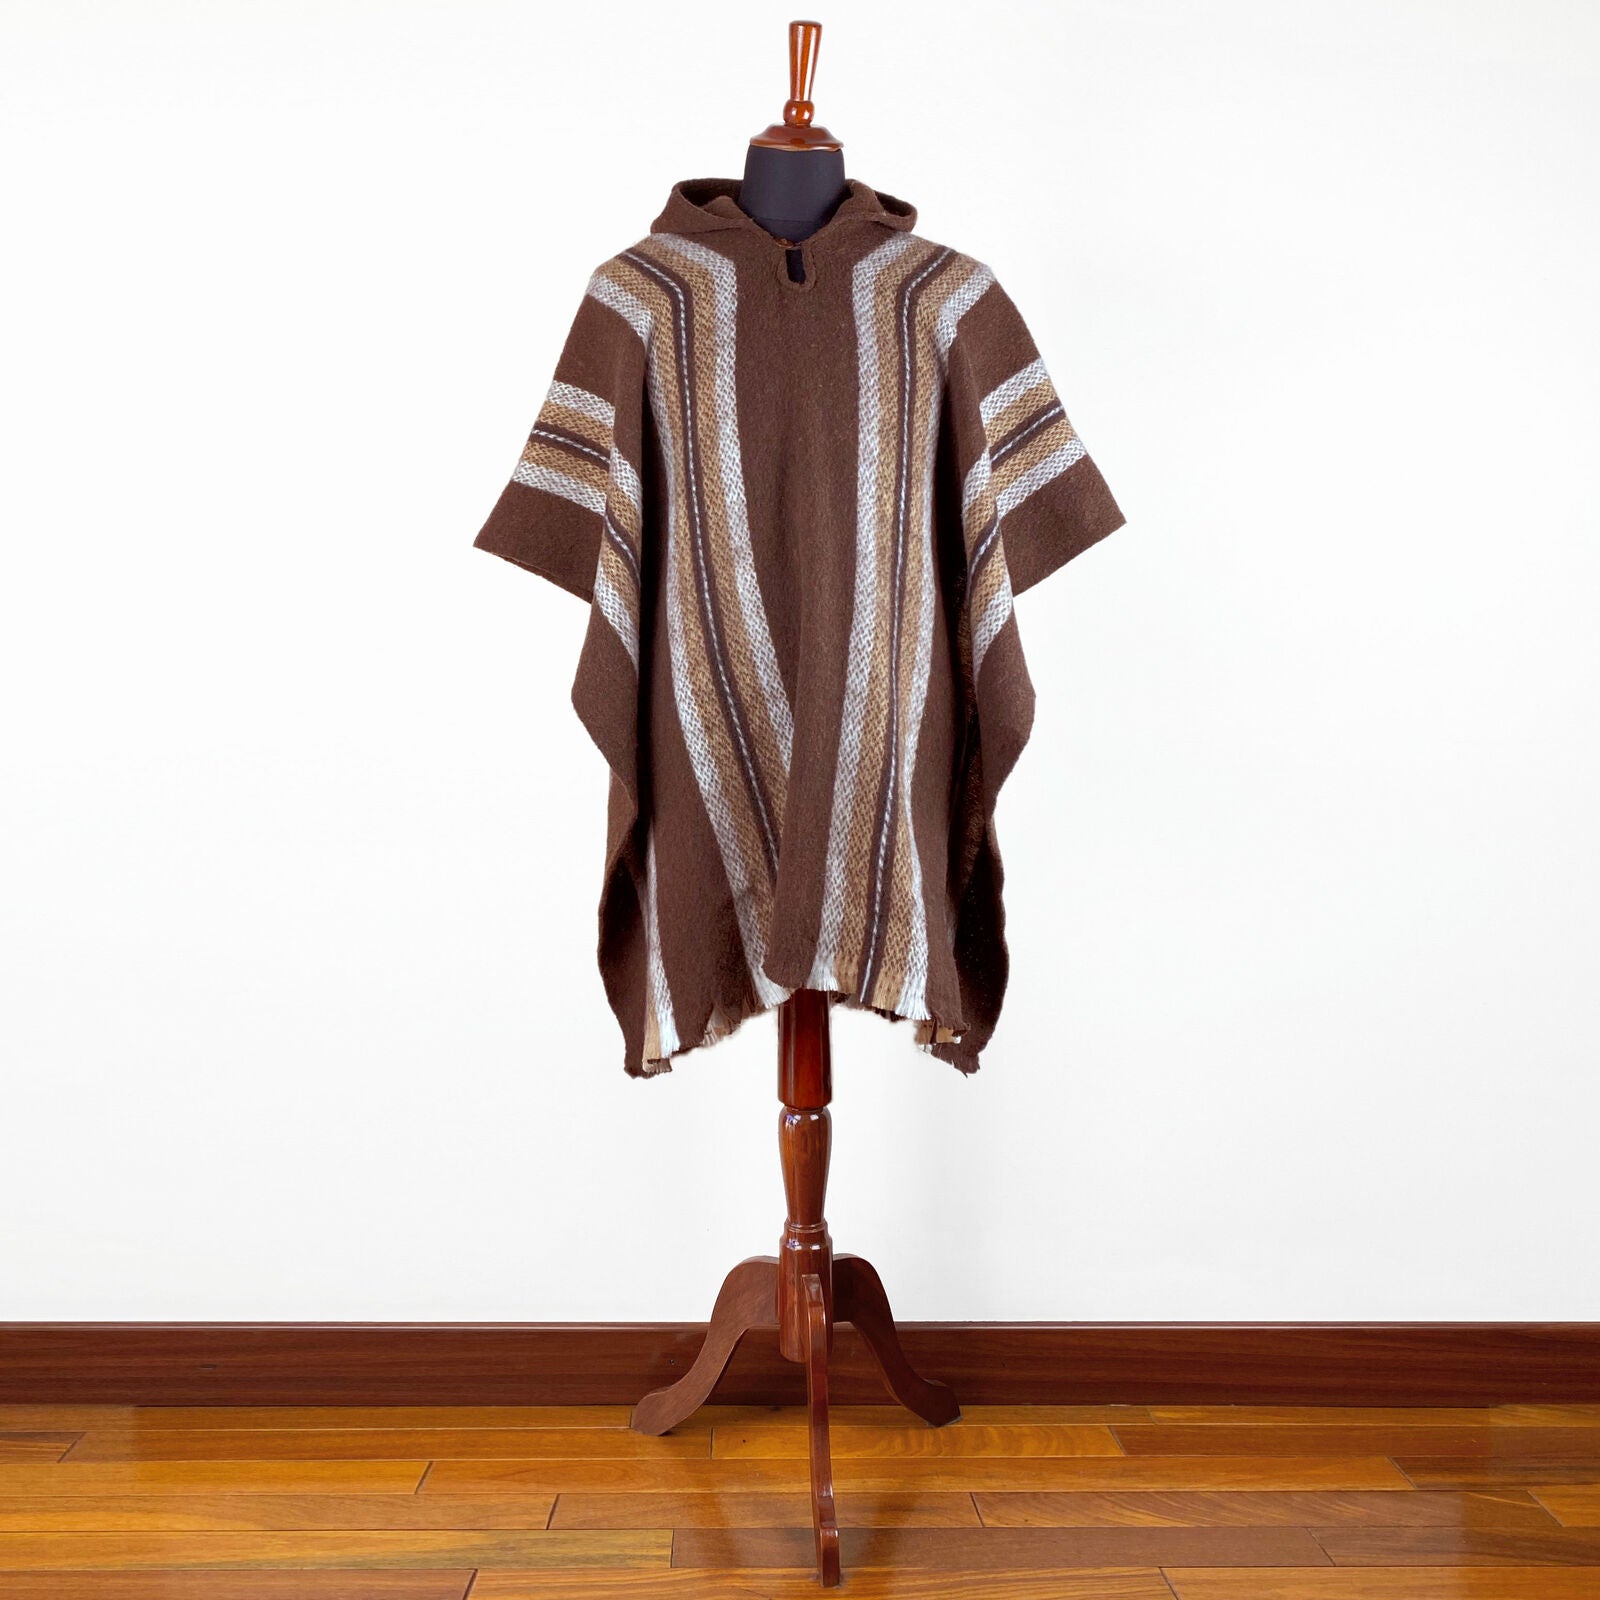 Unisex South American Handwoven Hooded Poncho Pullover - striped pattern brown